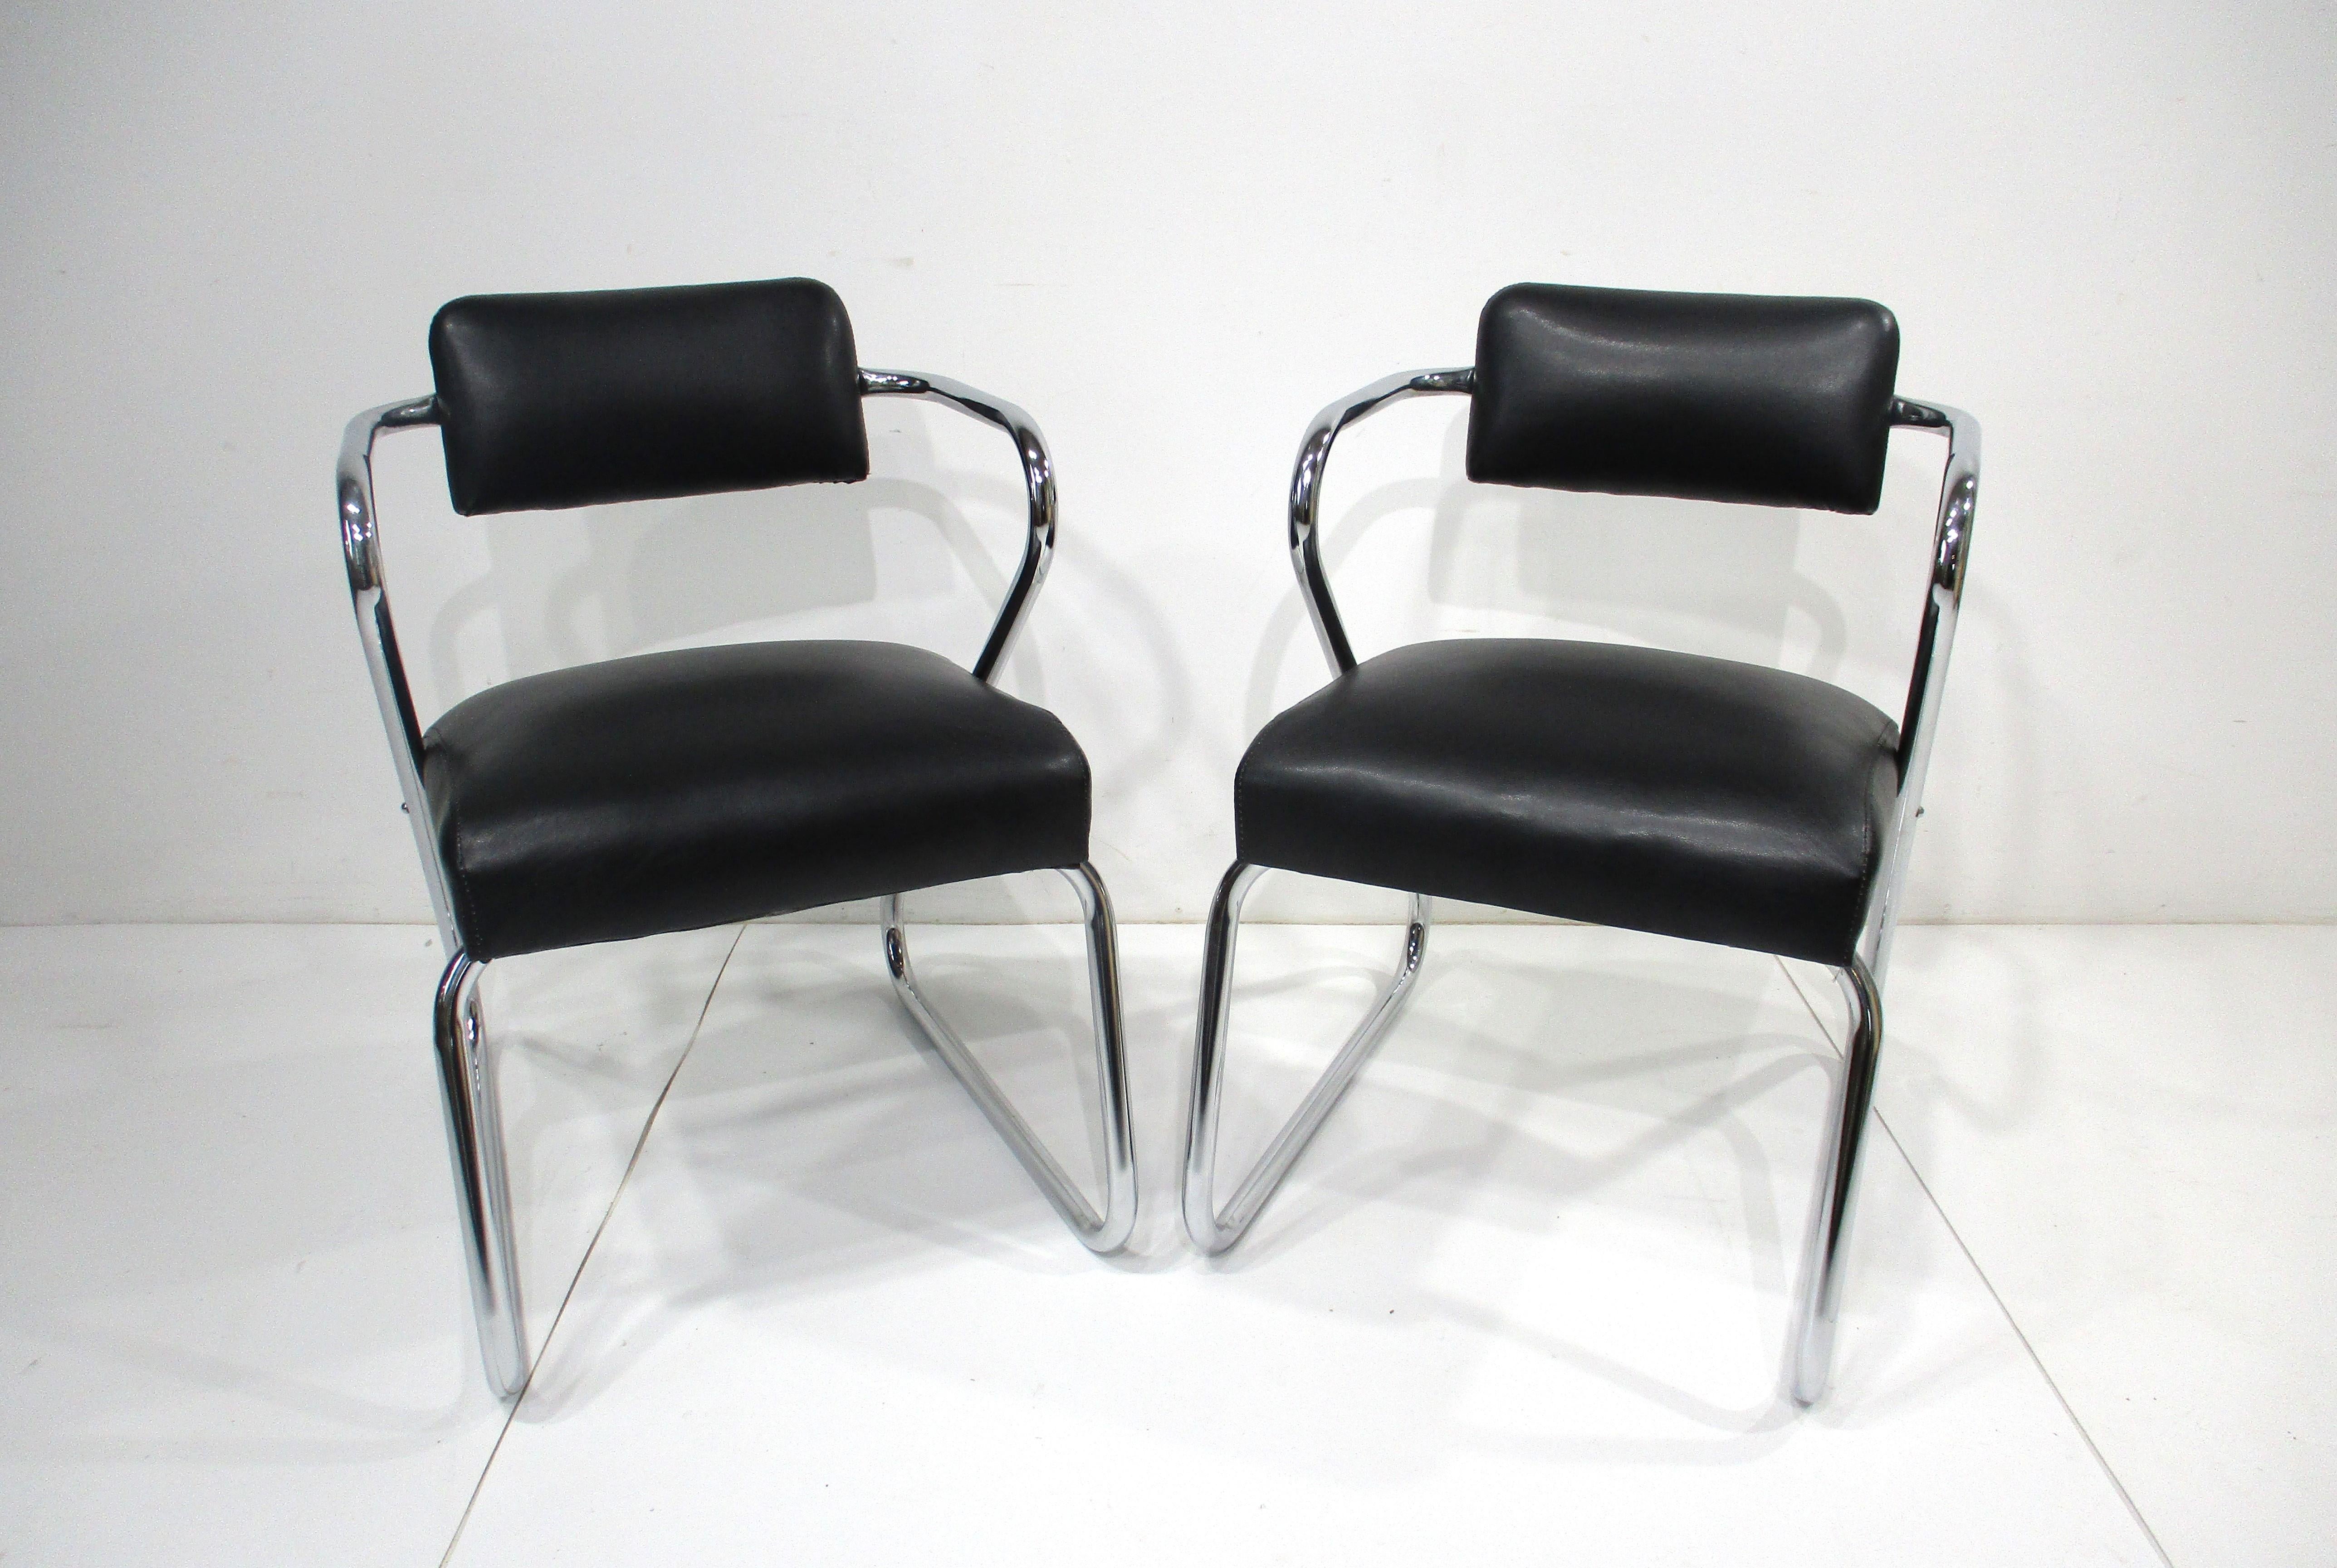 A set of two sculptural chromed framed sitting chairs in the design manner of Gilbert Rohde's Z chairs . Upholstered in a satin black soft and smooth leatherette fabric which makes them very comfortable for long periods . Manufactured by Royal